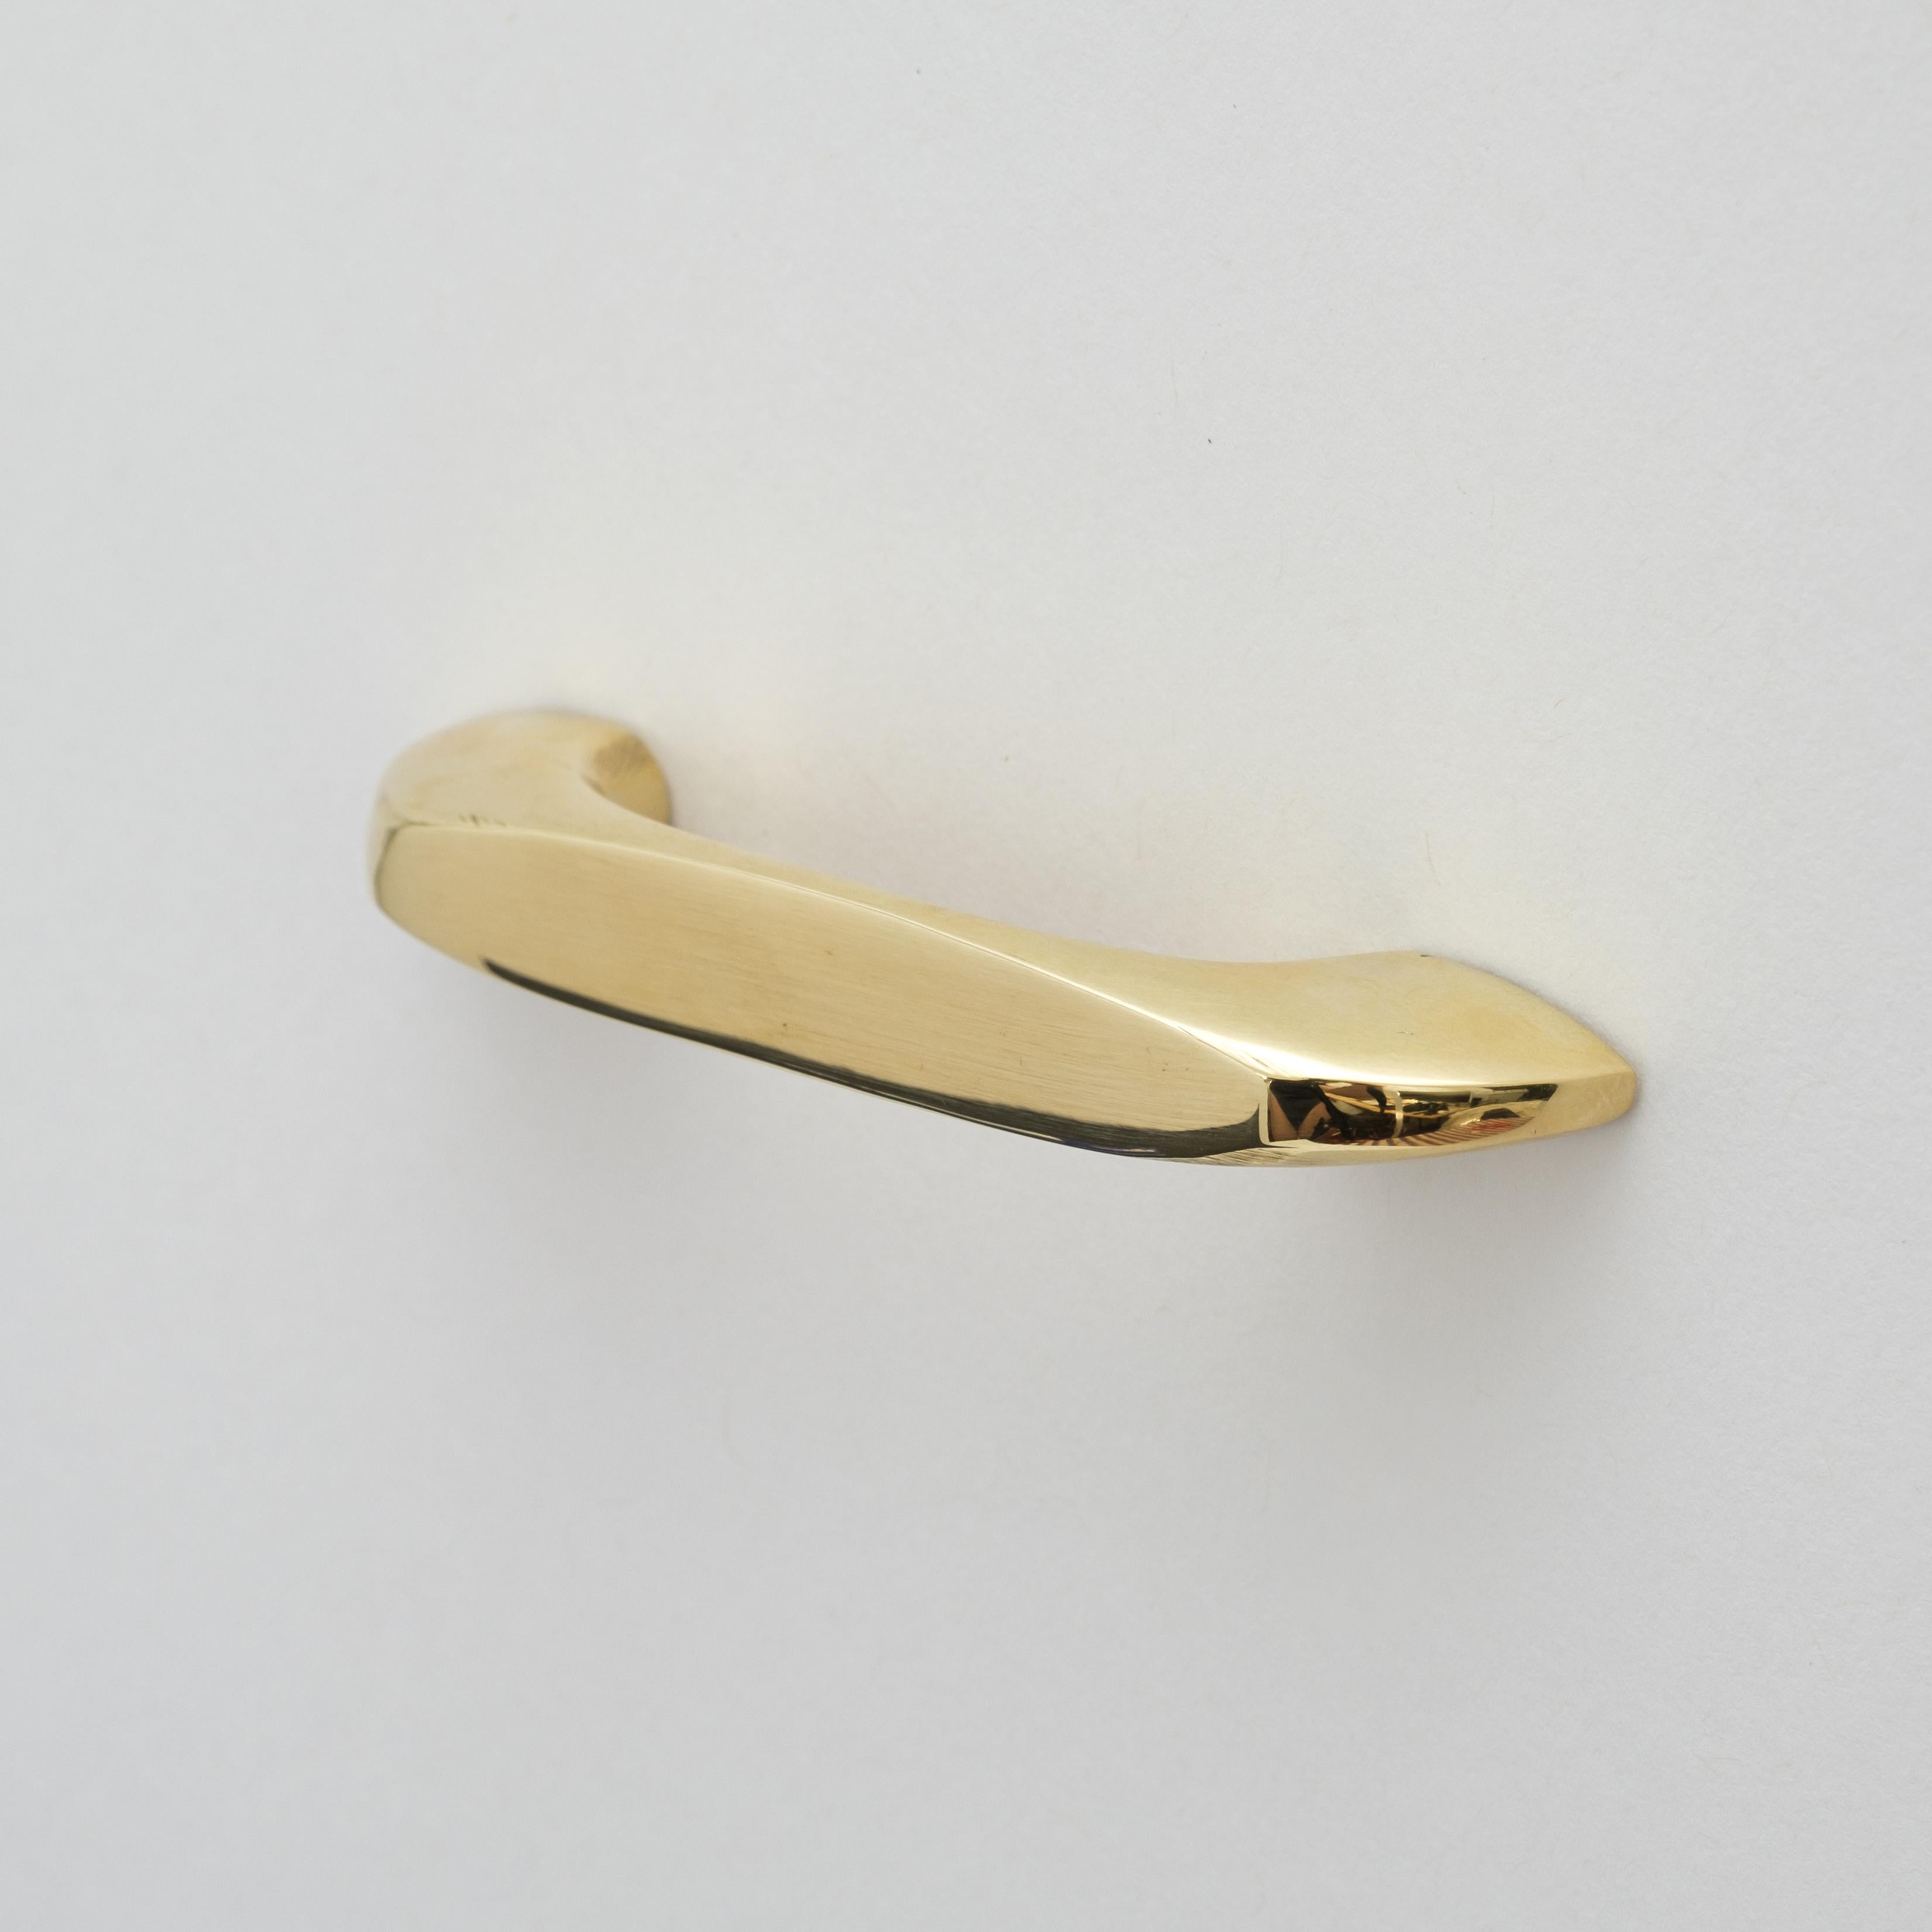 Carl Auböck Model #9061-1 polished brass drawer pull.

Designed in the 1950s, this versatile and Minimalist Viennese drawer pull is executed in polished brass by Werkstätte Carl Auböck, Austria. Its minimalist design combines clean form with